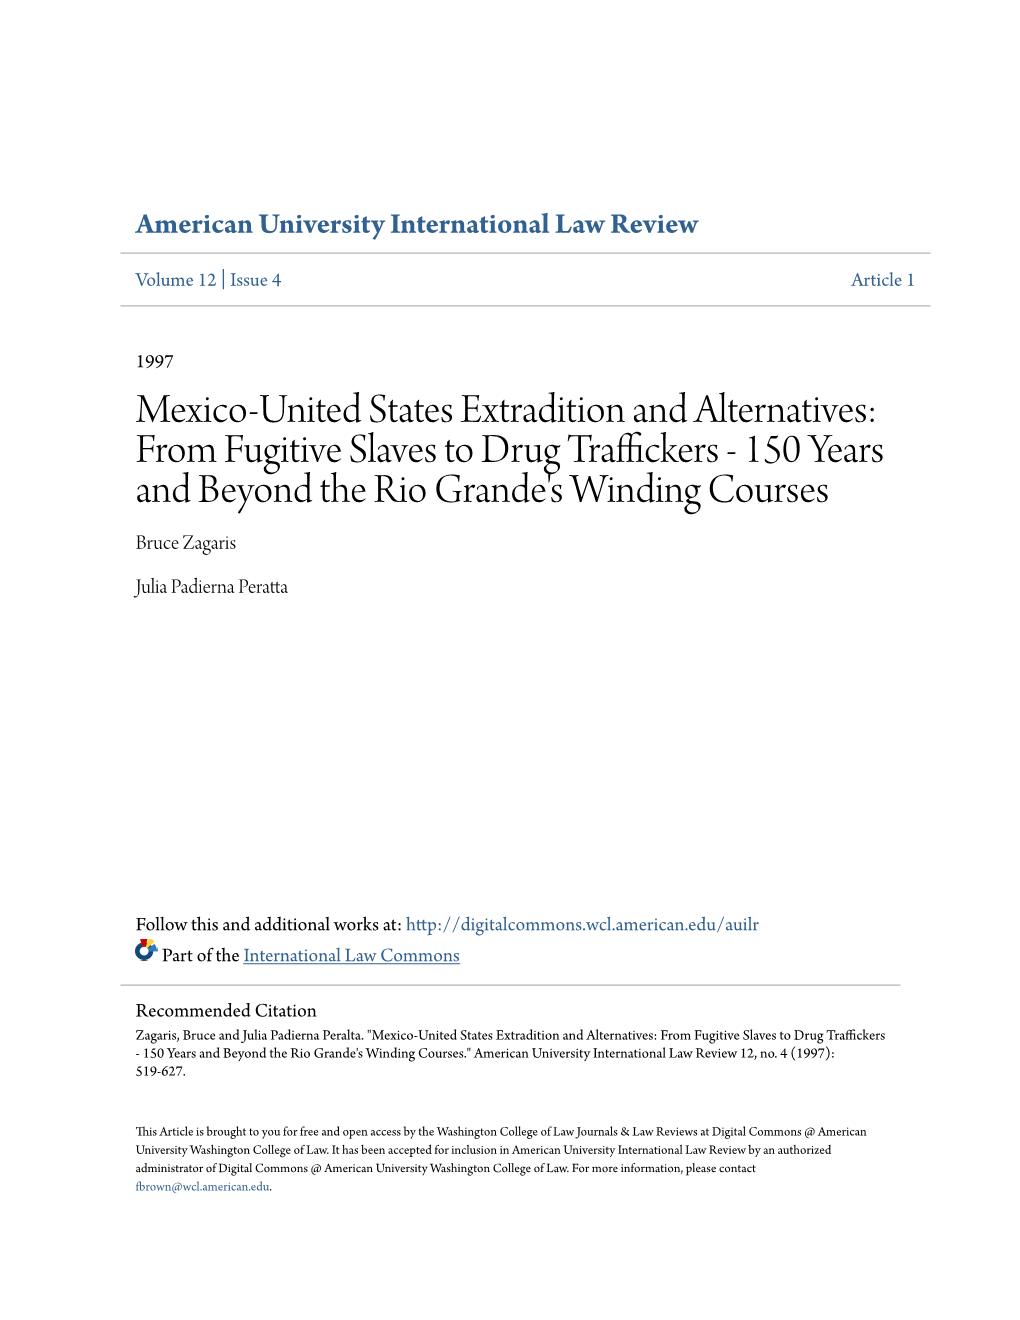 Mexico-United States Extradition and Alternatives: from Fugitive Slaves to Drug Traffickers - 150 Years and Beyond the Rio Grande's Winding Courses Bruce Zagaris